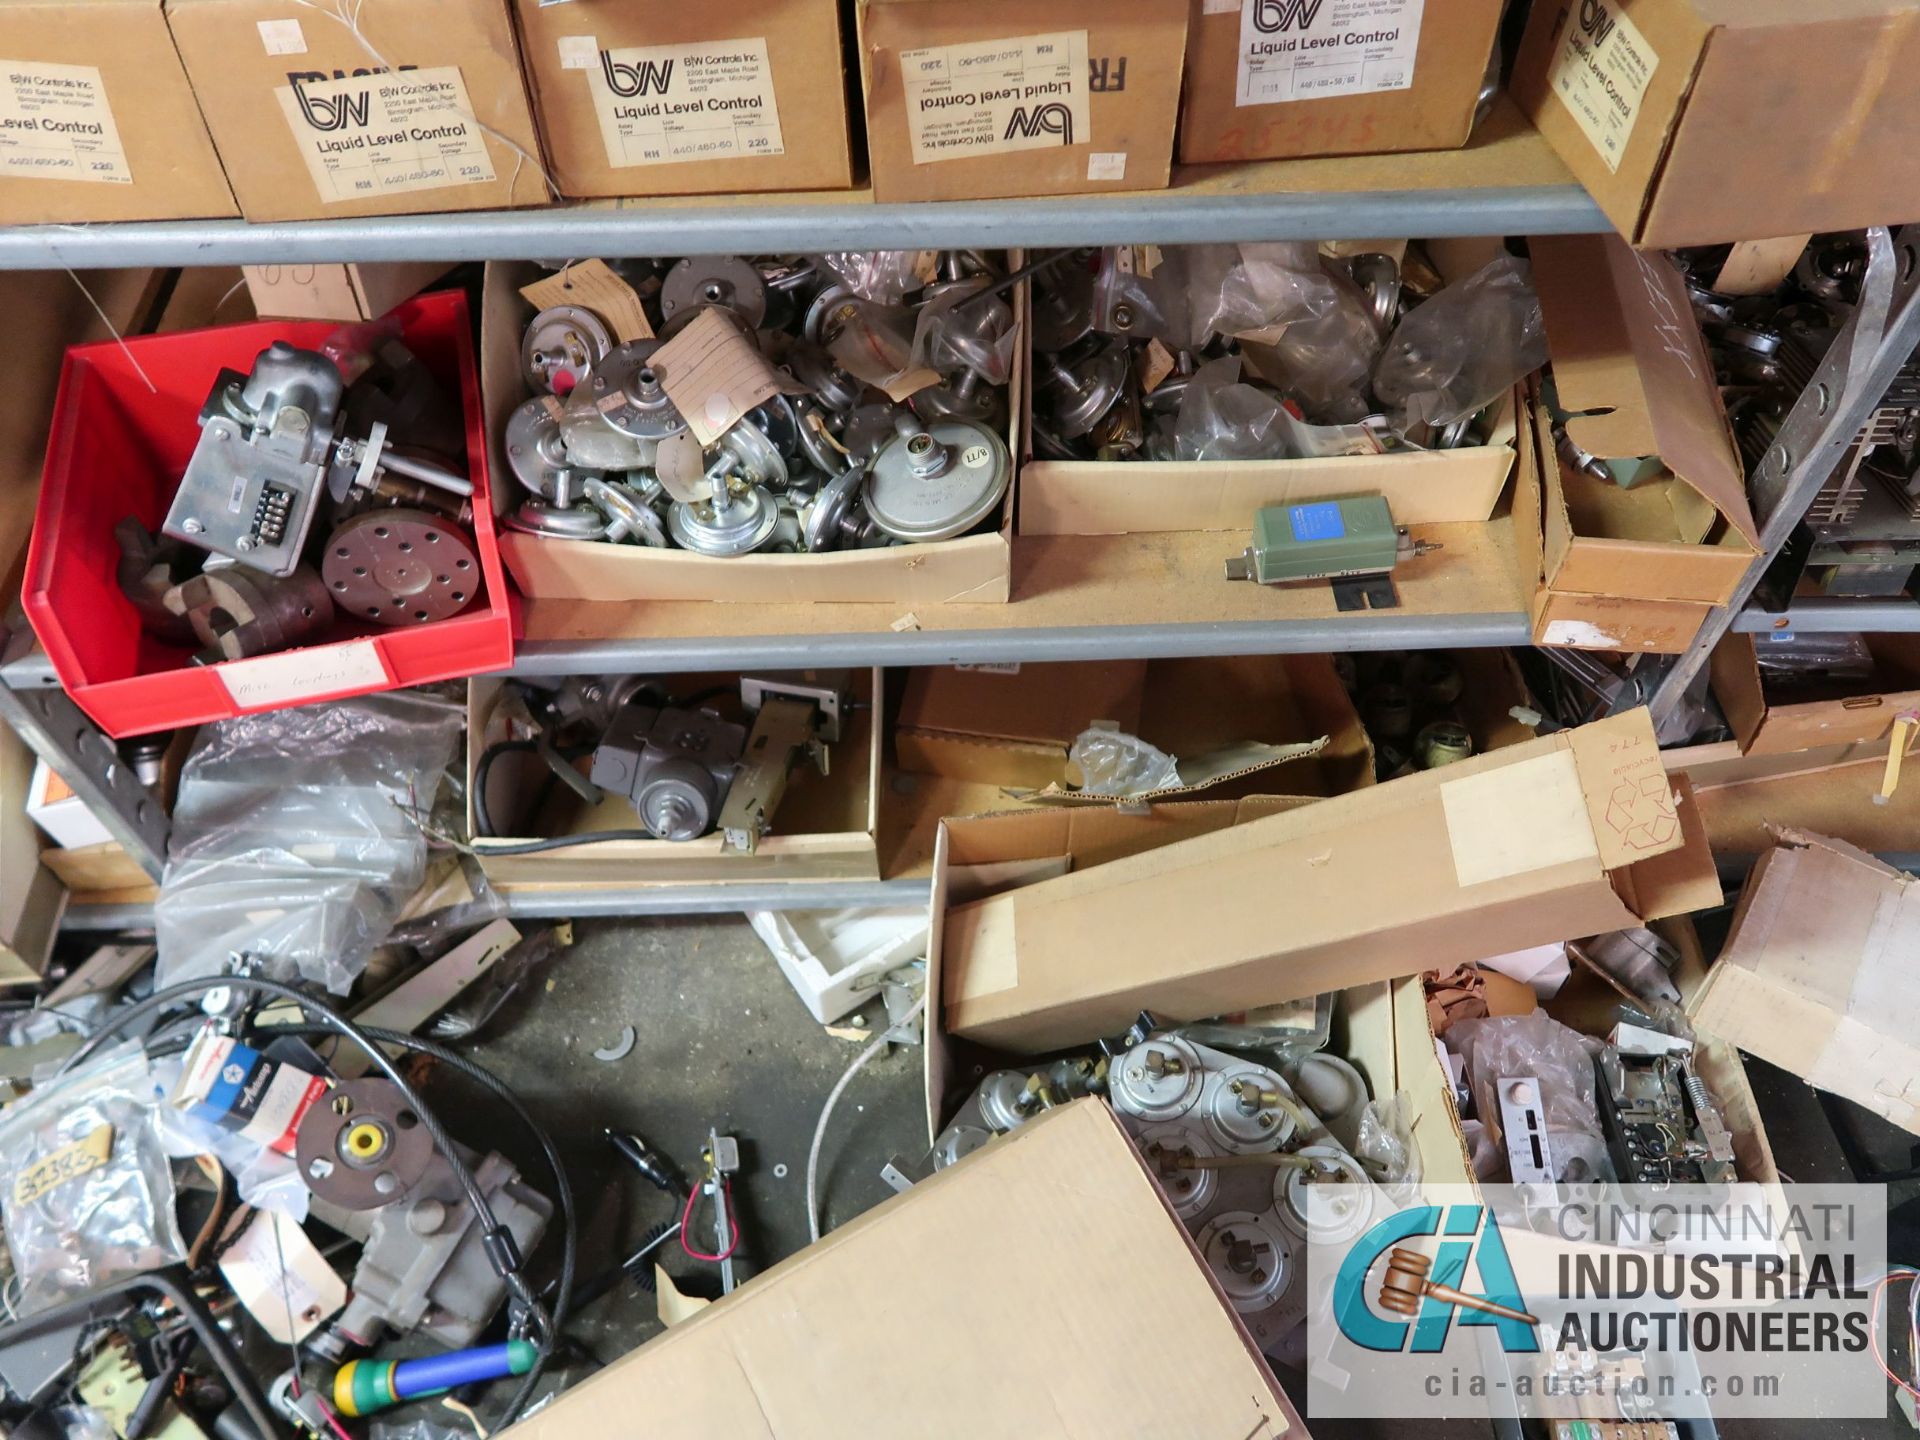 CONTENTS OF (16) SHELVES INCLUDING MISCELLANEOUS VALVES, THERMOSTATS, ANALYZERS, ELECTRICAL, CONTROL - Image 21 of 47